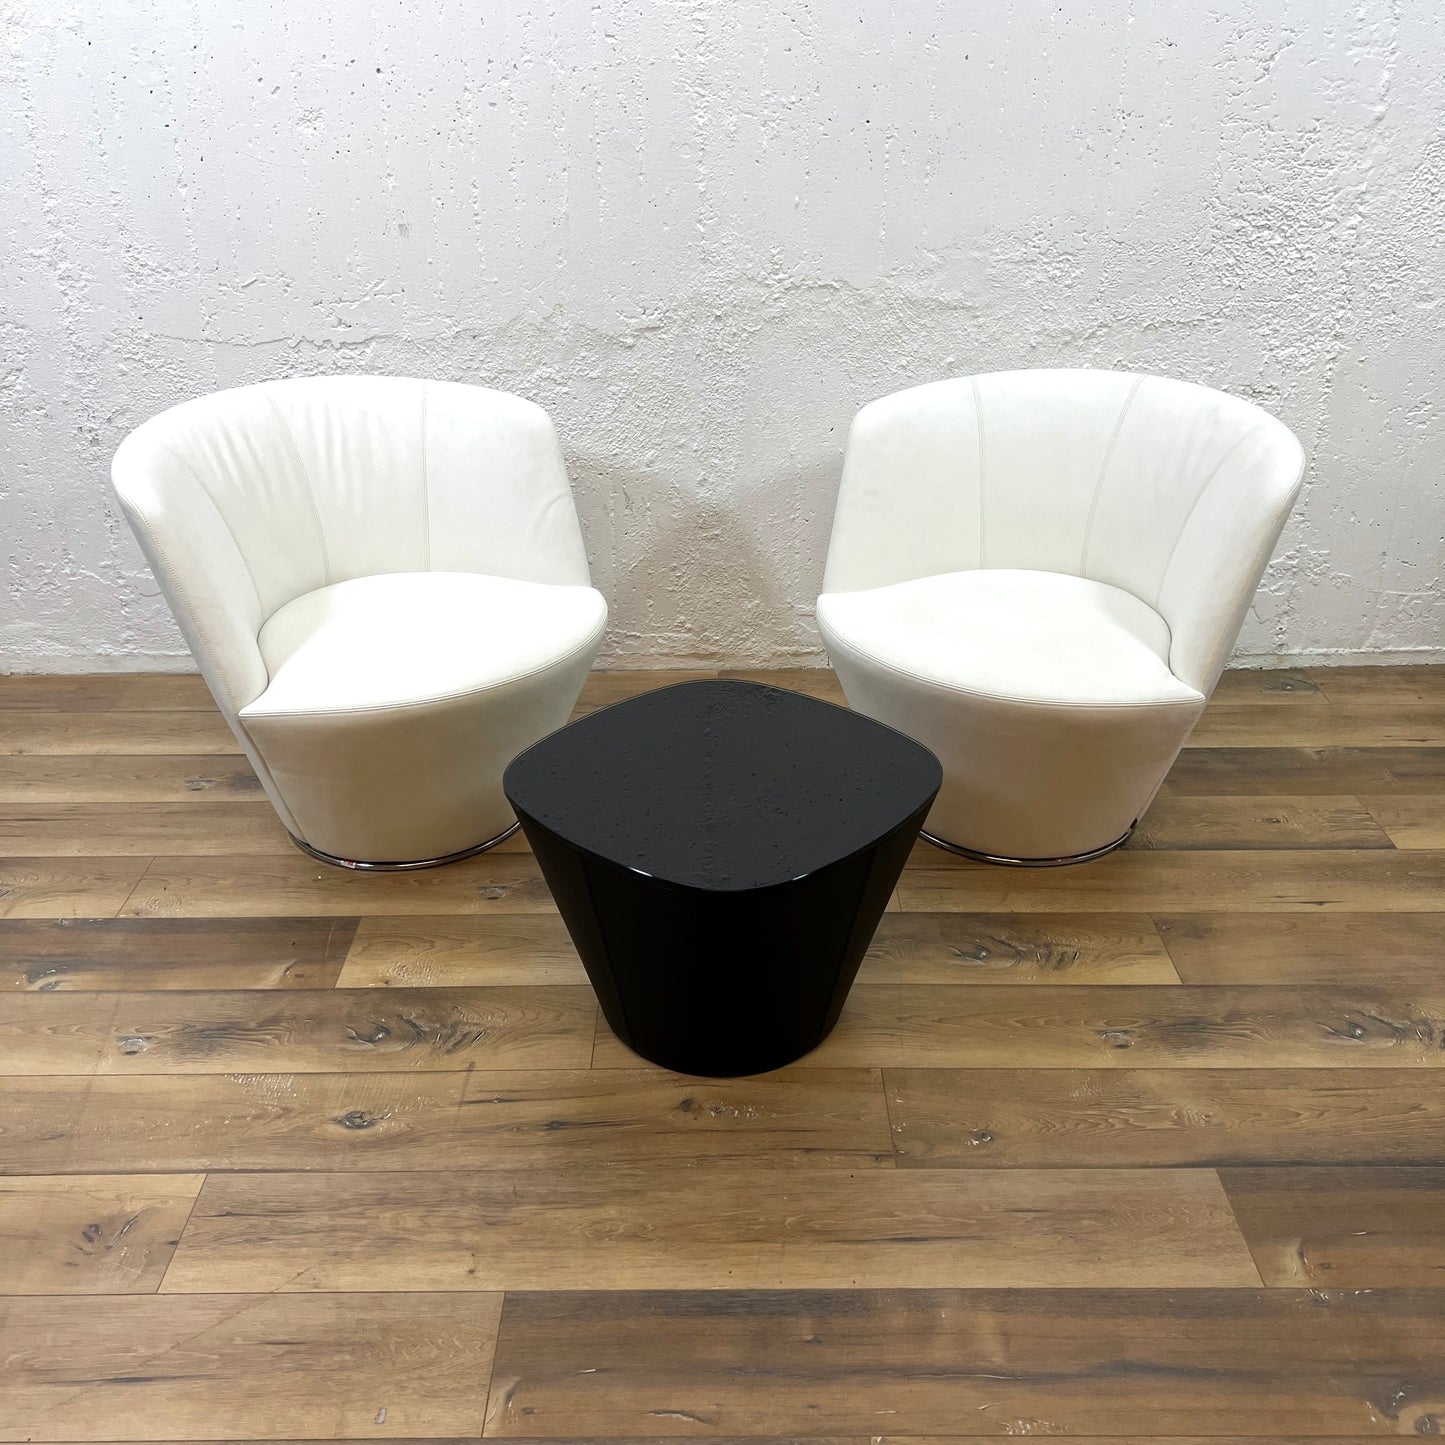 Walter Knoll Ameo Eoos Sessel mit Coffeetable